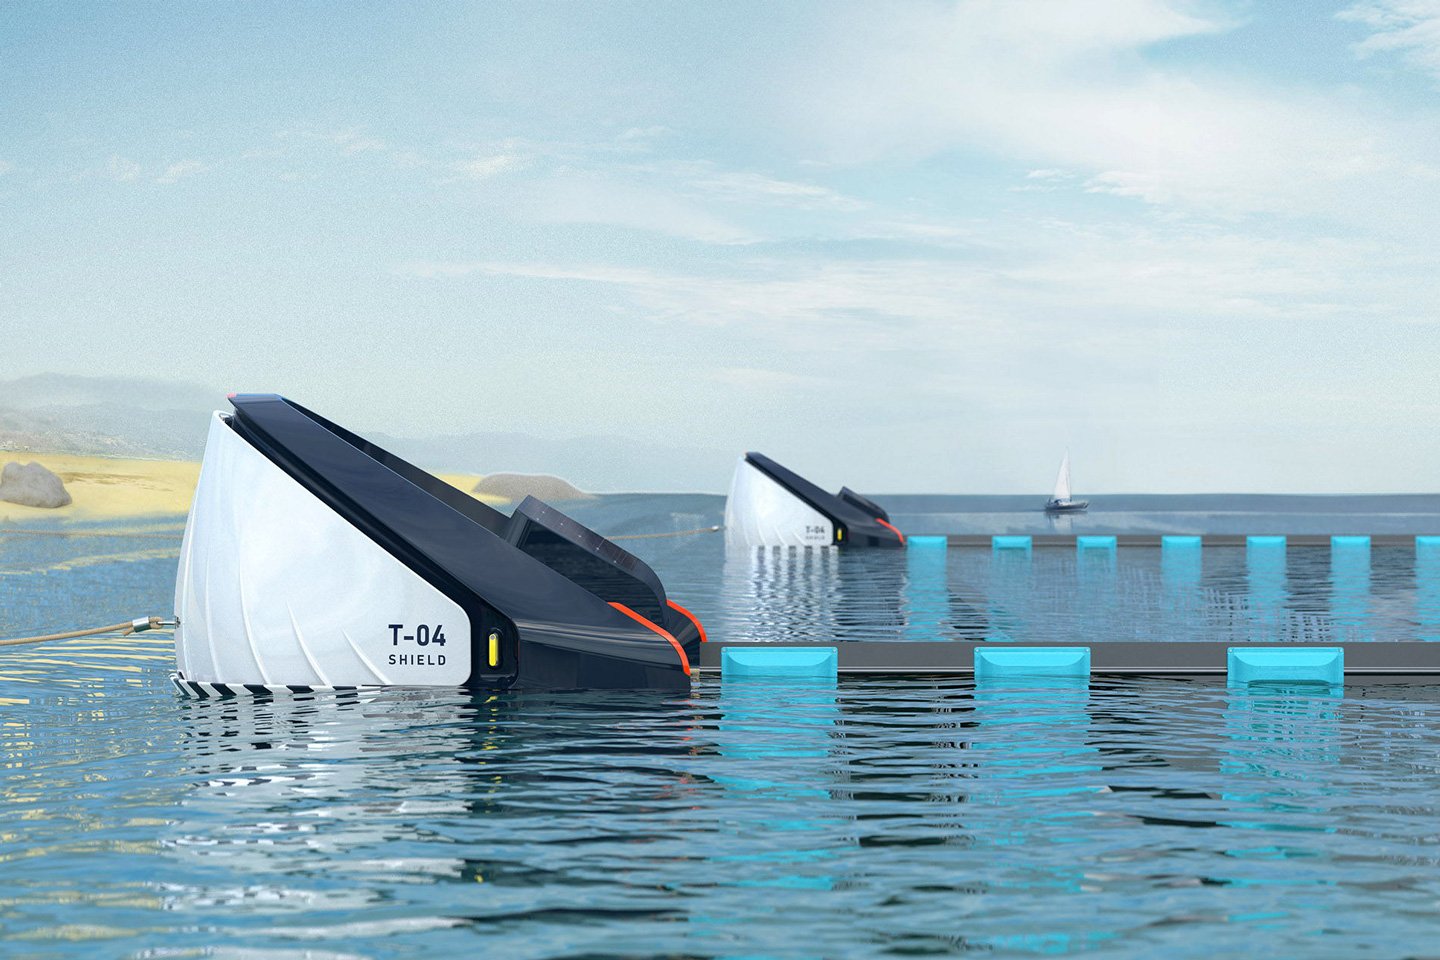 #The Shield ‘Ocean Garbage Collector’ helps sustainably take care of our sea waste problem